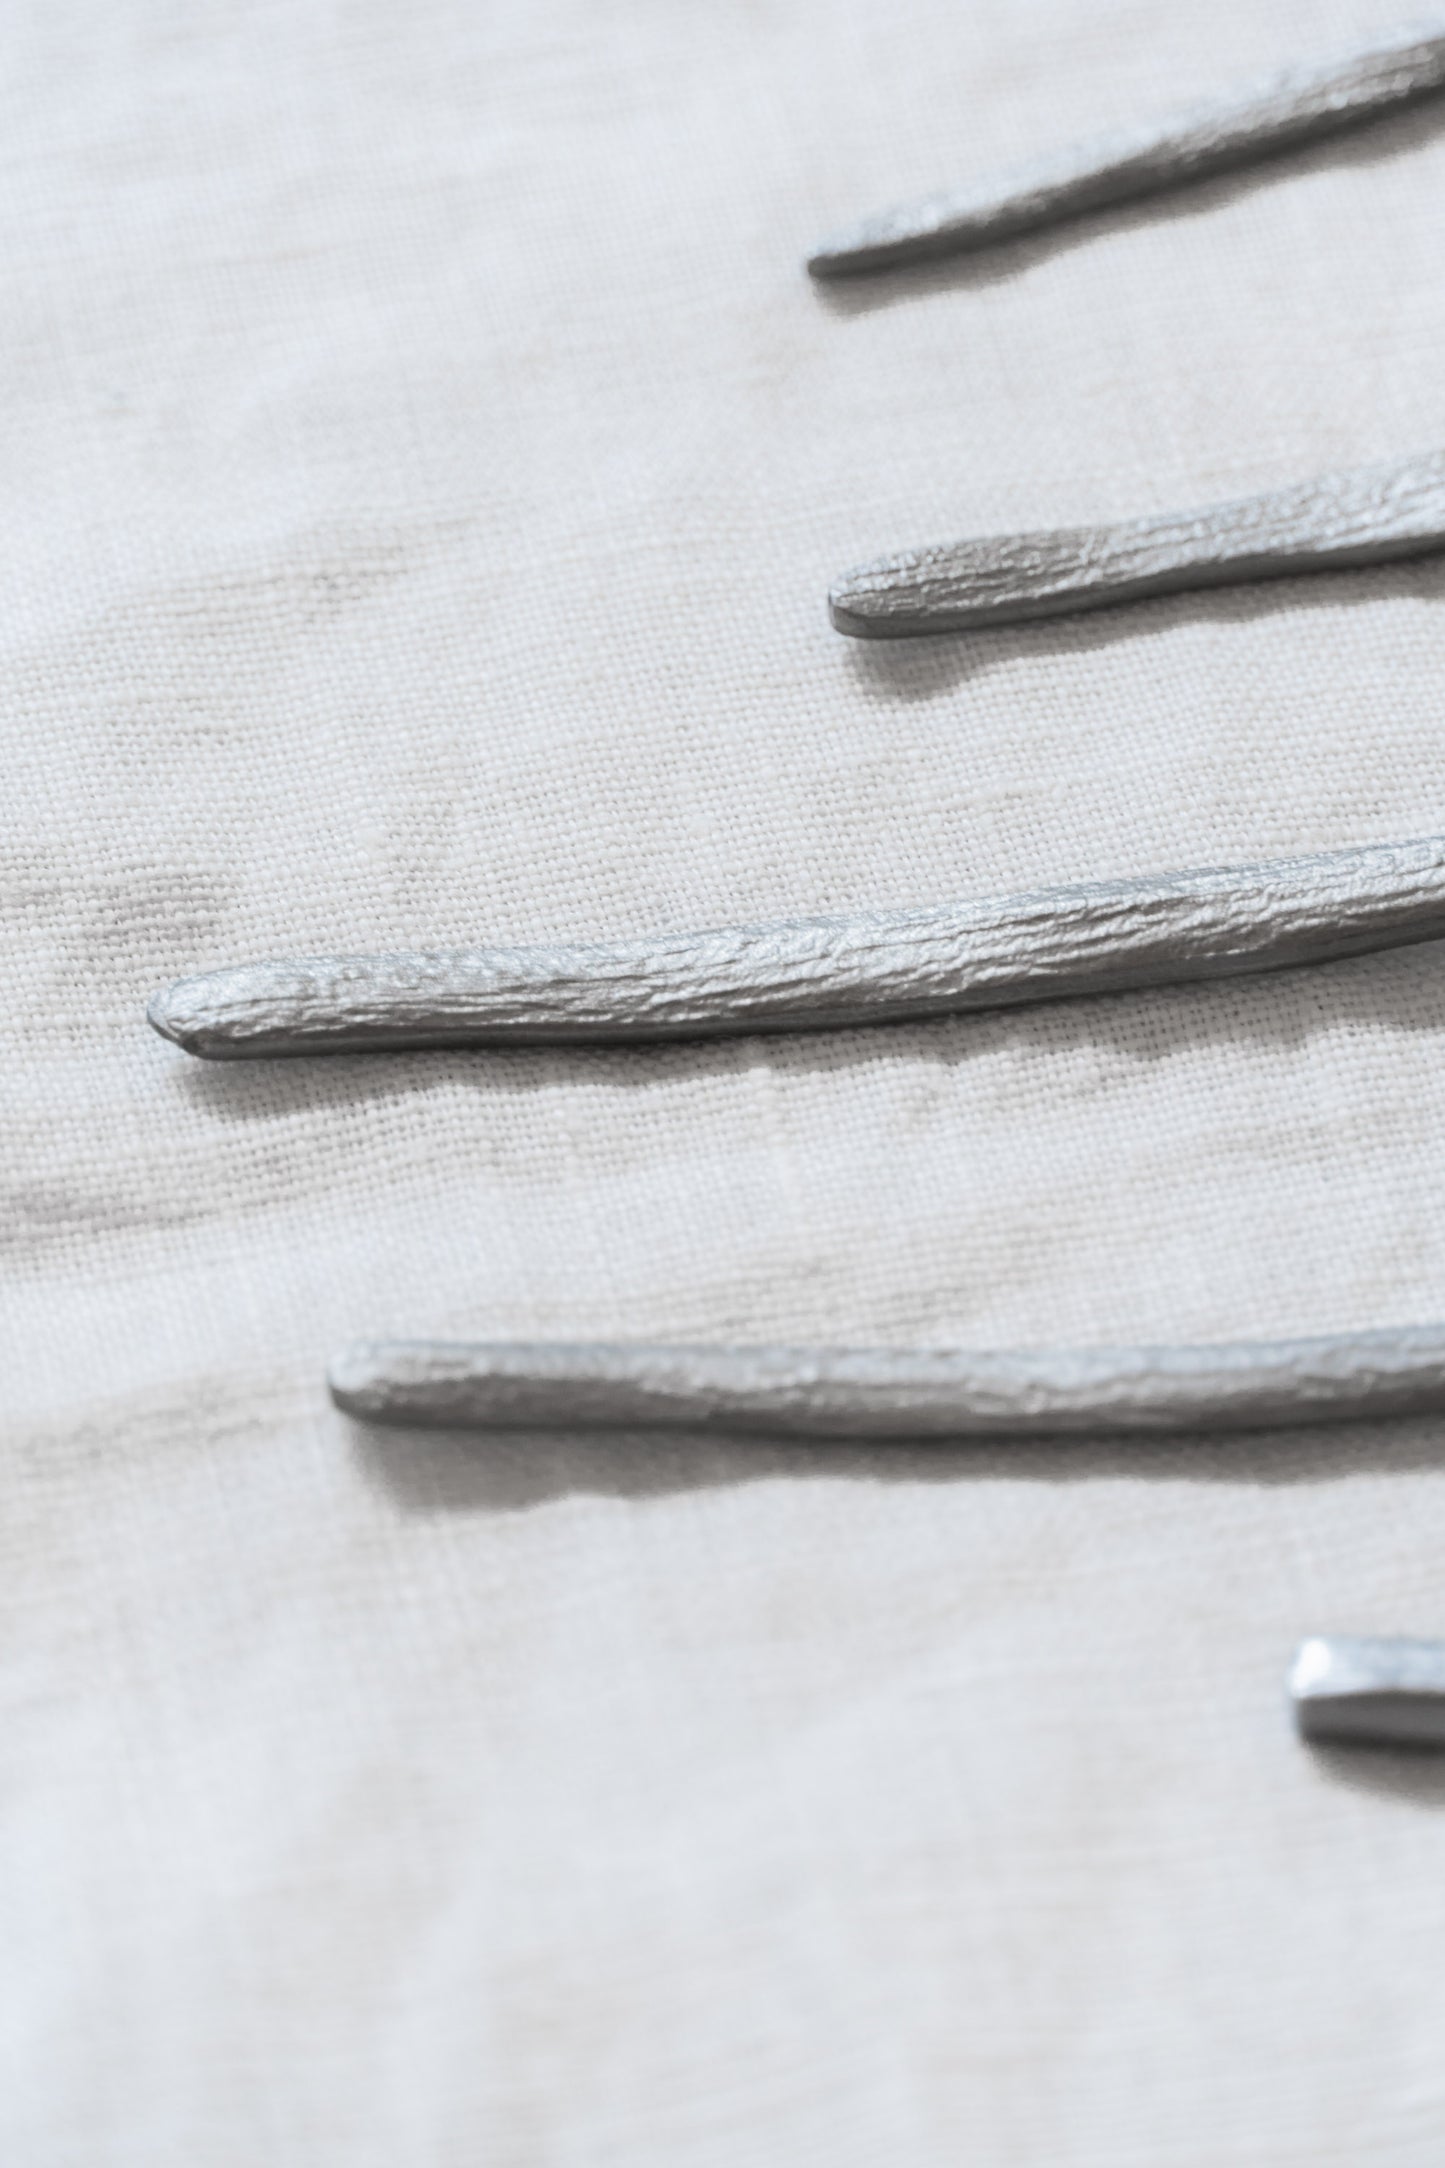 Details handle : Flora Vulgaris Cutlery Collection by Serax.